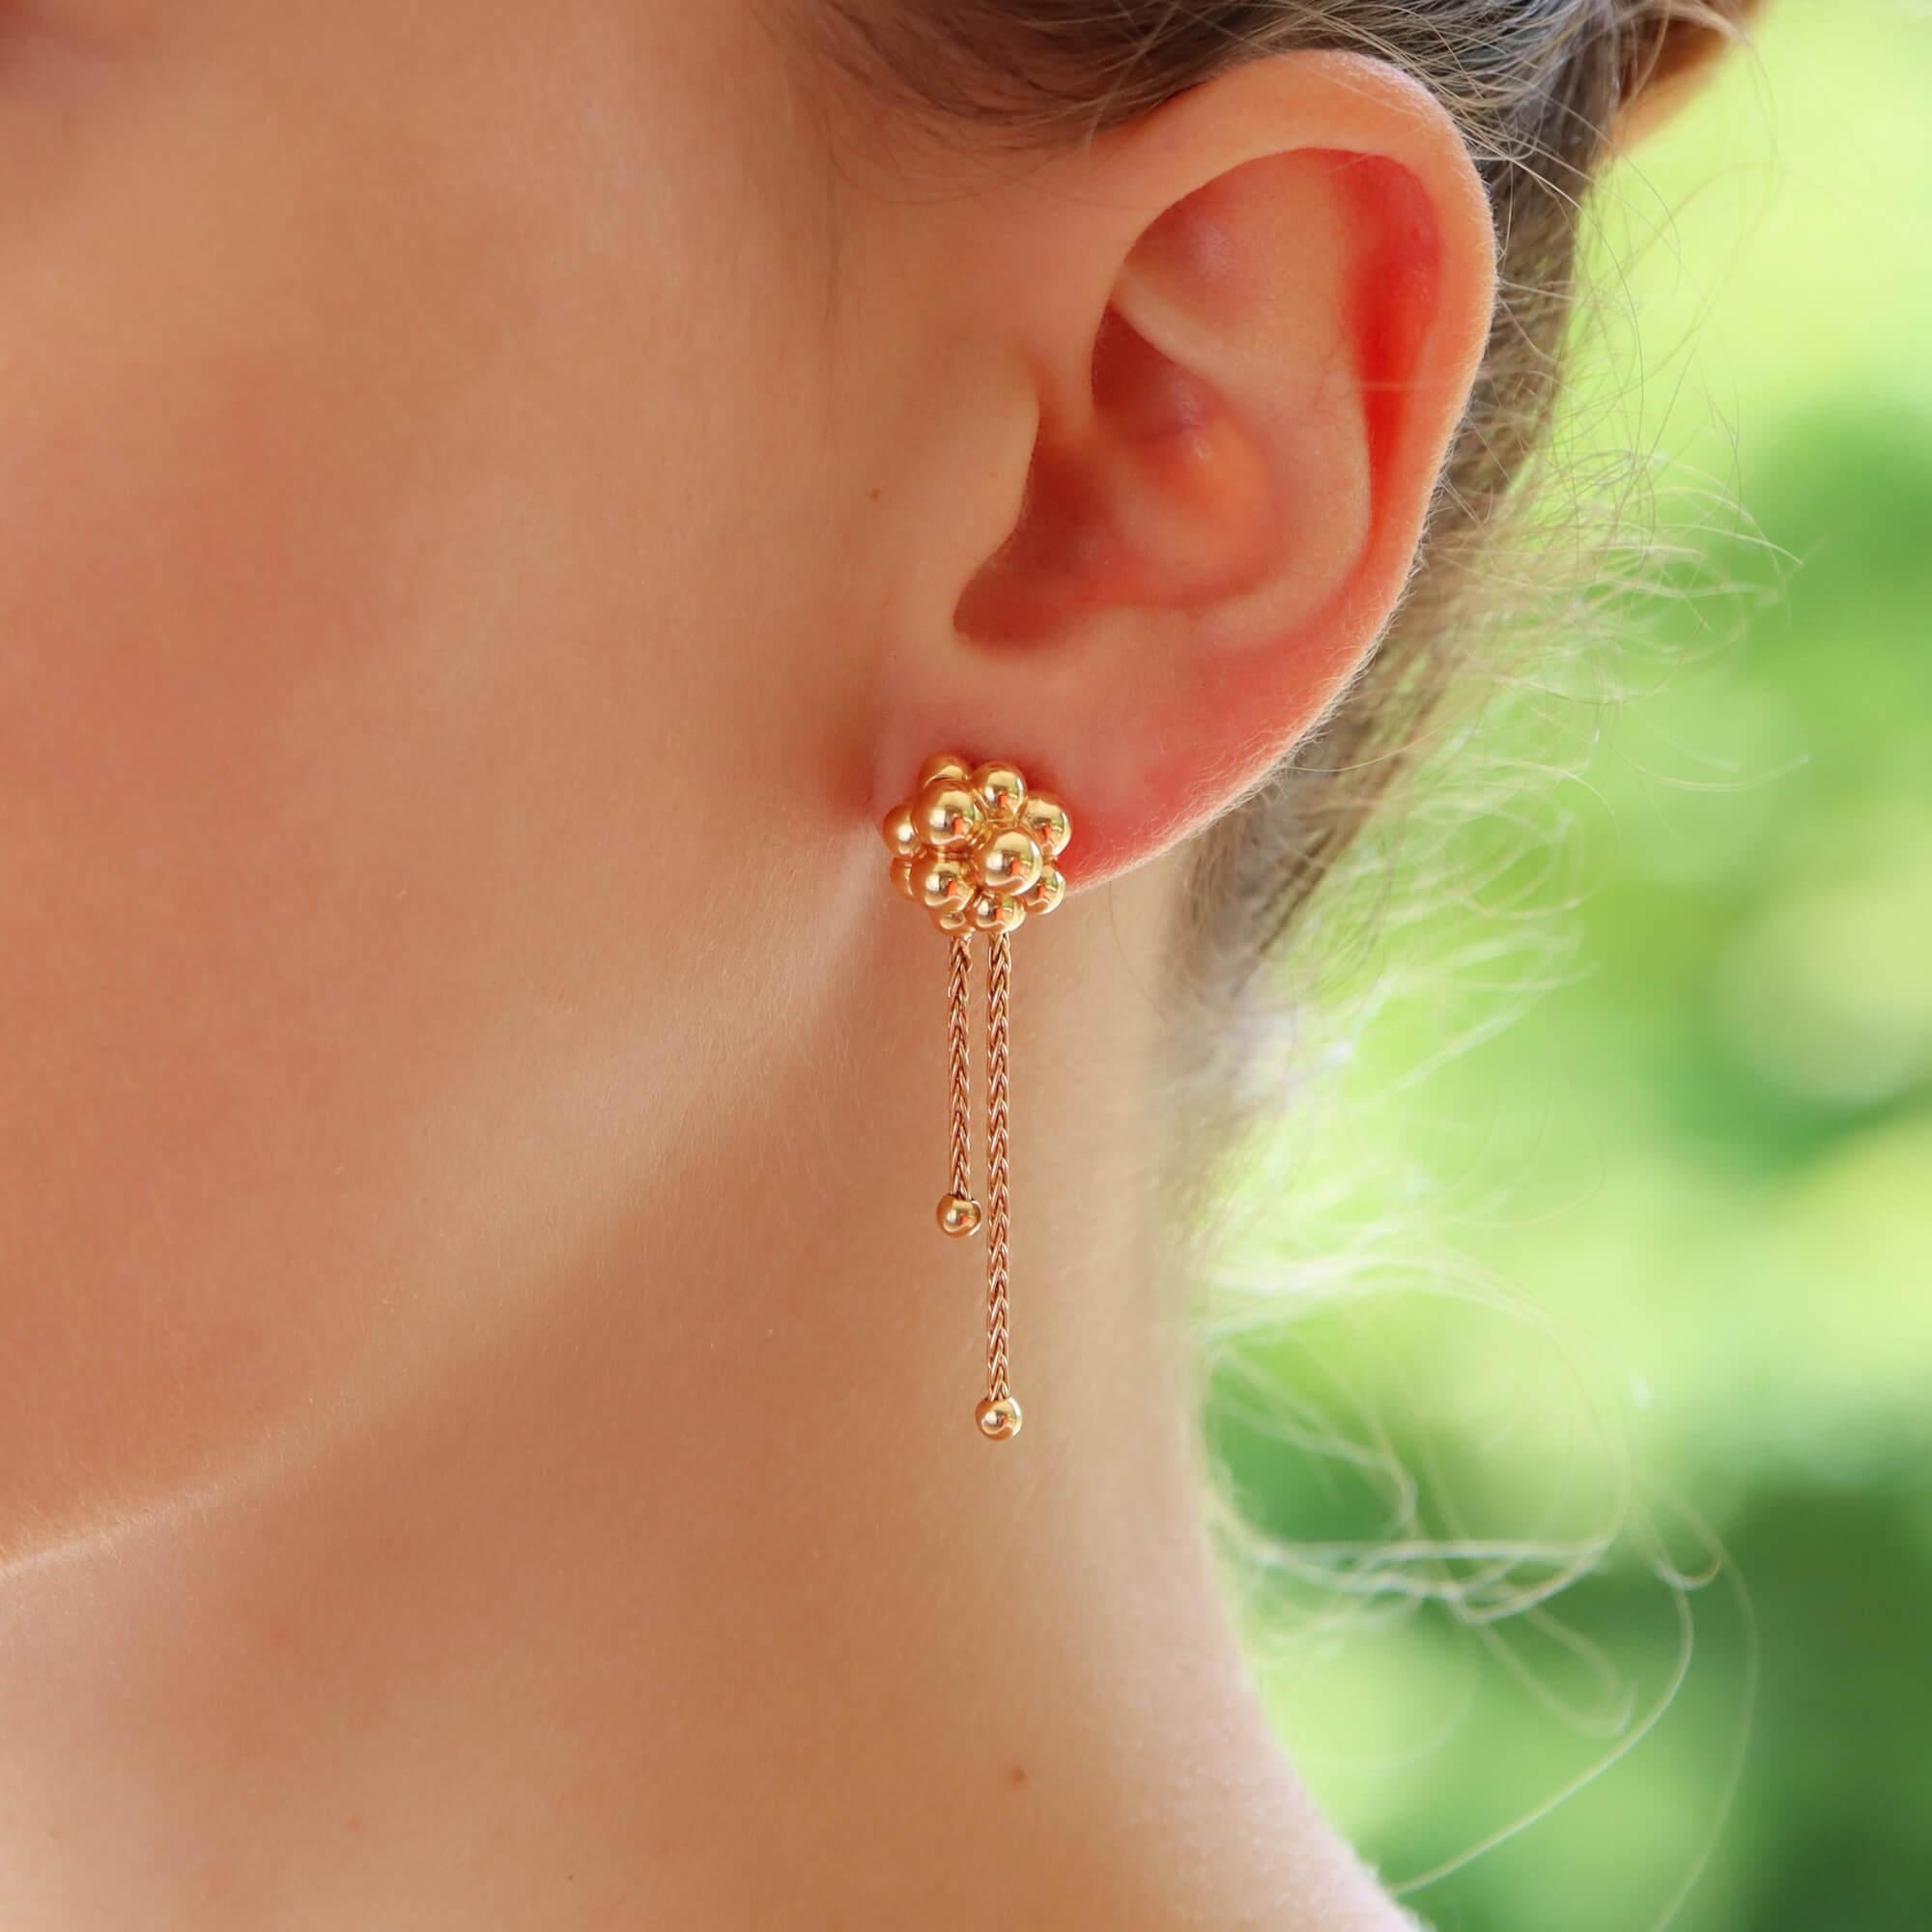 A unique pair of vintage Boucheron ‘Grains De Mure’ drop earrings set in 18k rose gold.

Each earring is firstly composed of the iconic Boucheron ‘Grains’ bubble motif. The motif is composed of a number of bubbles which looks fantastic once on the